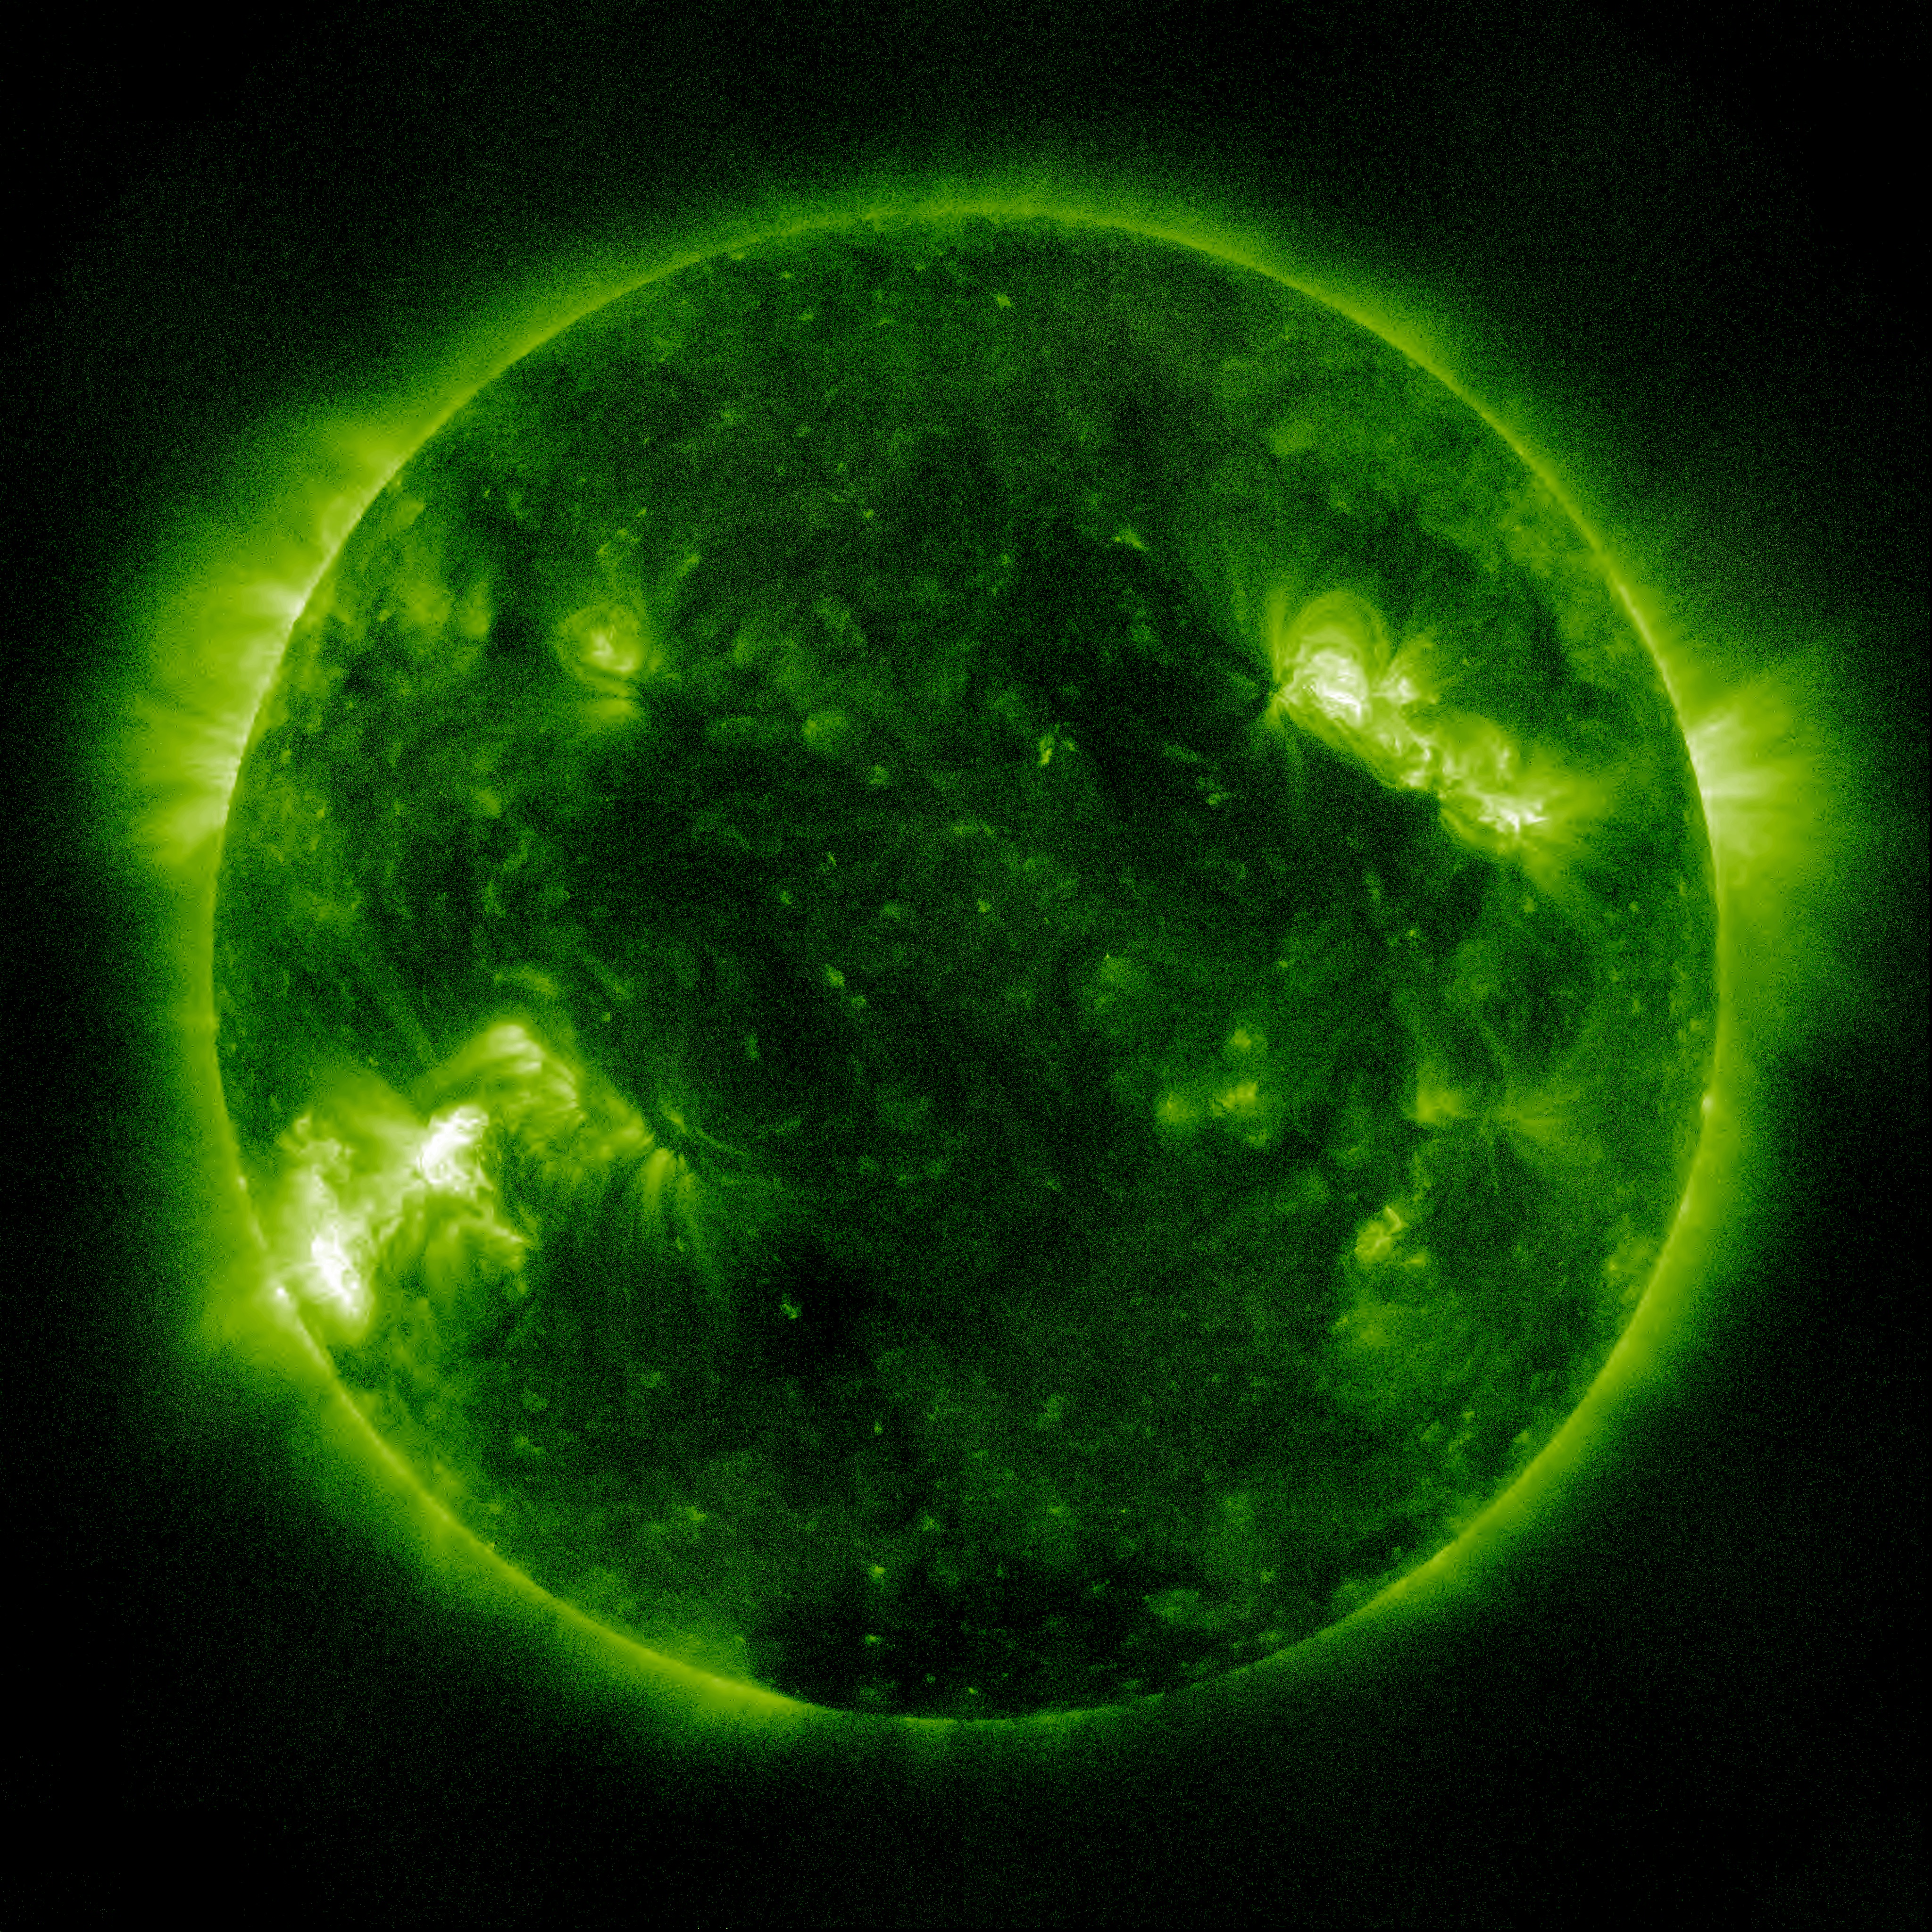 Movie of the solar flare from April 2011.  4Kx4K source frames and 1Kx1K movies